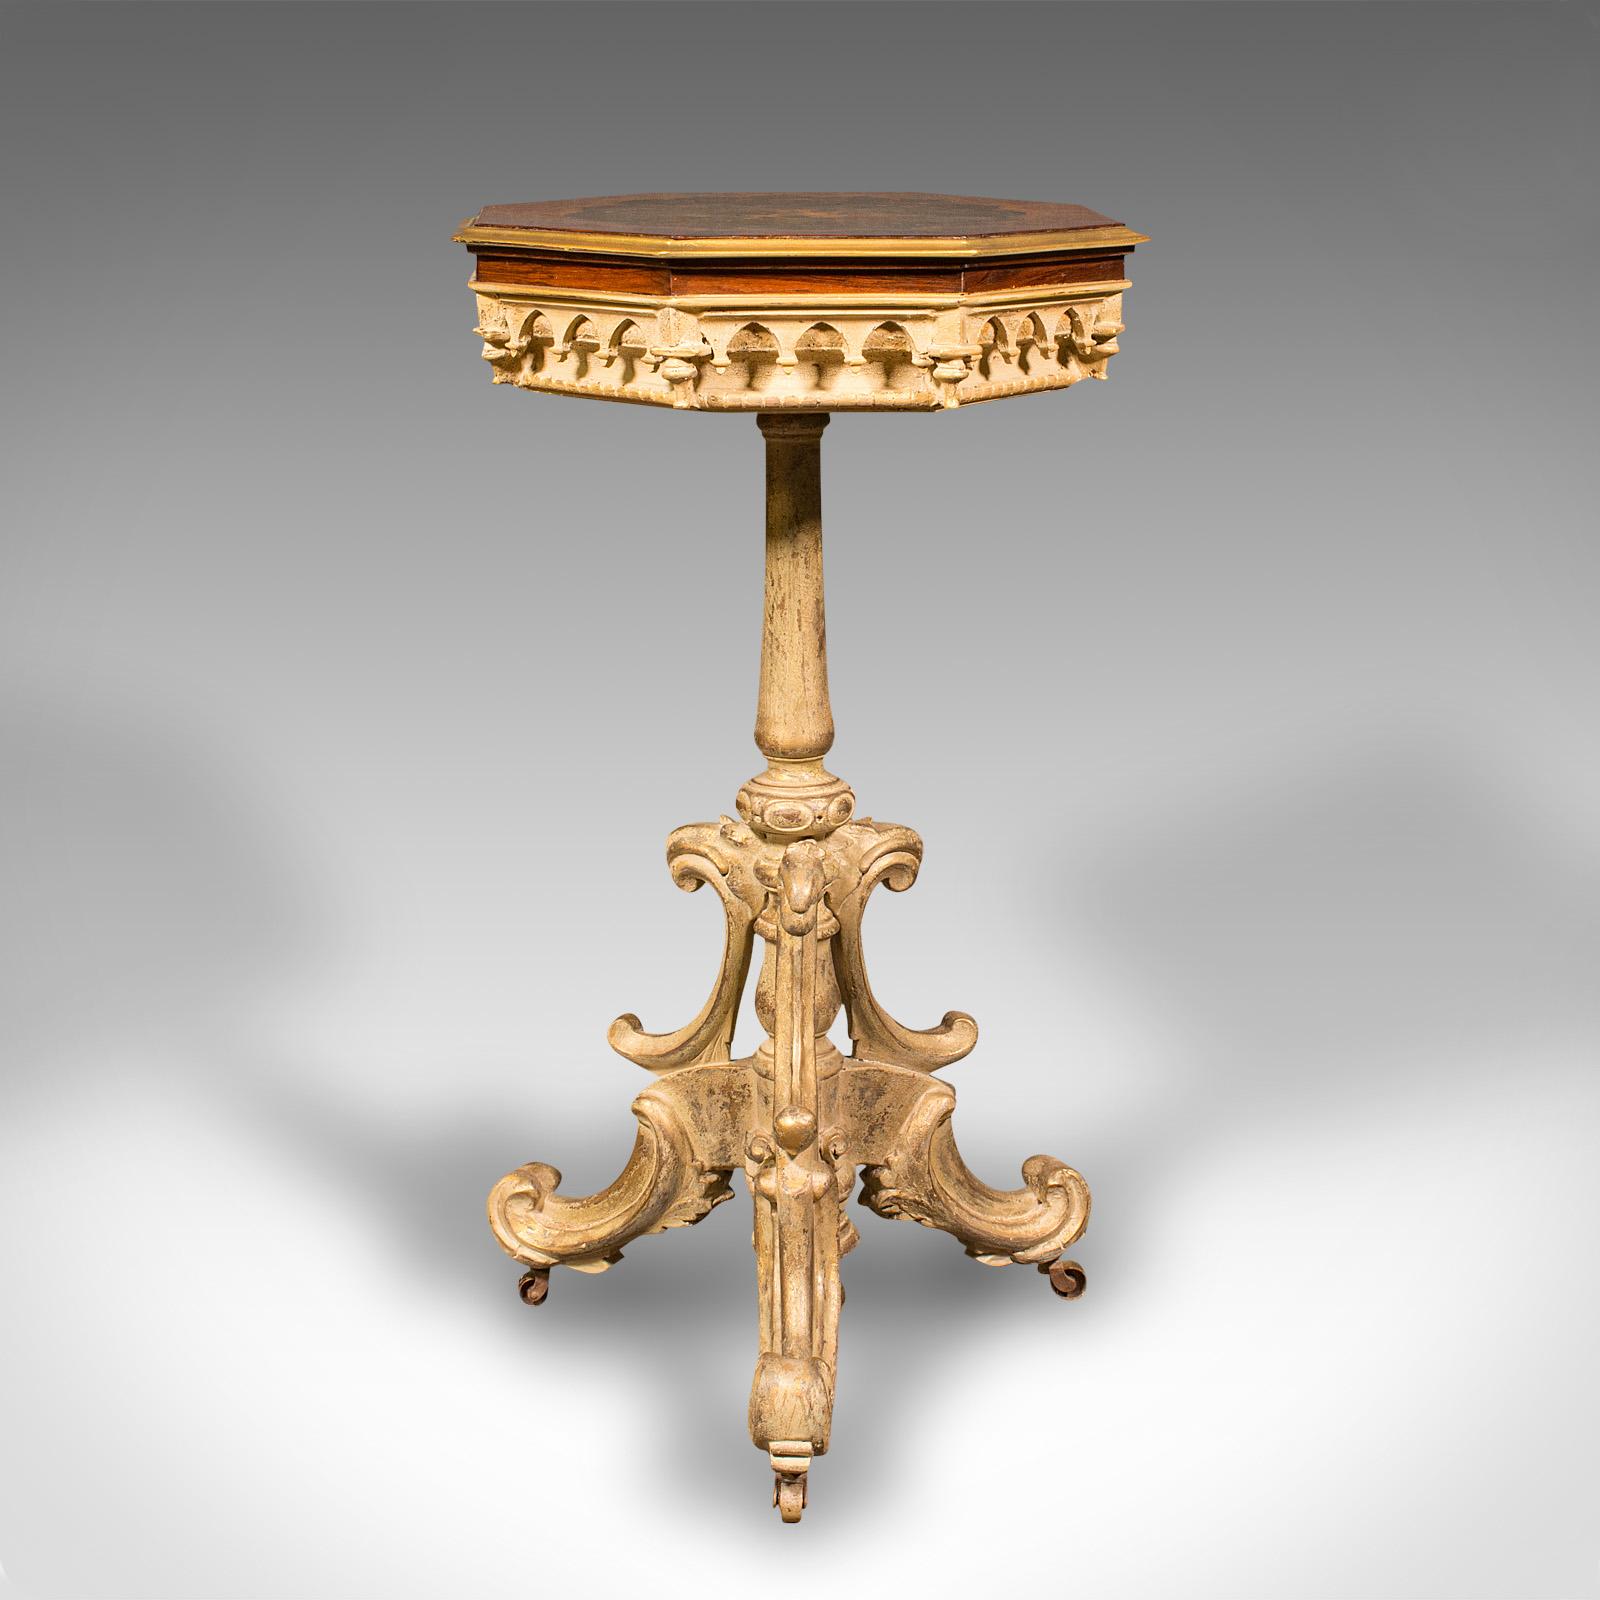 Unknown Antique Decorative Side Table, Continental, Lamp, Regency Revival, Victorian For Sale